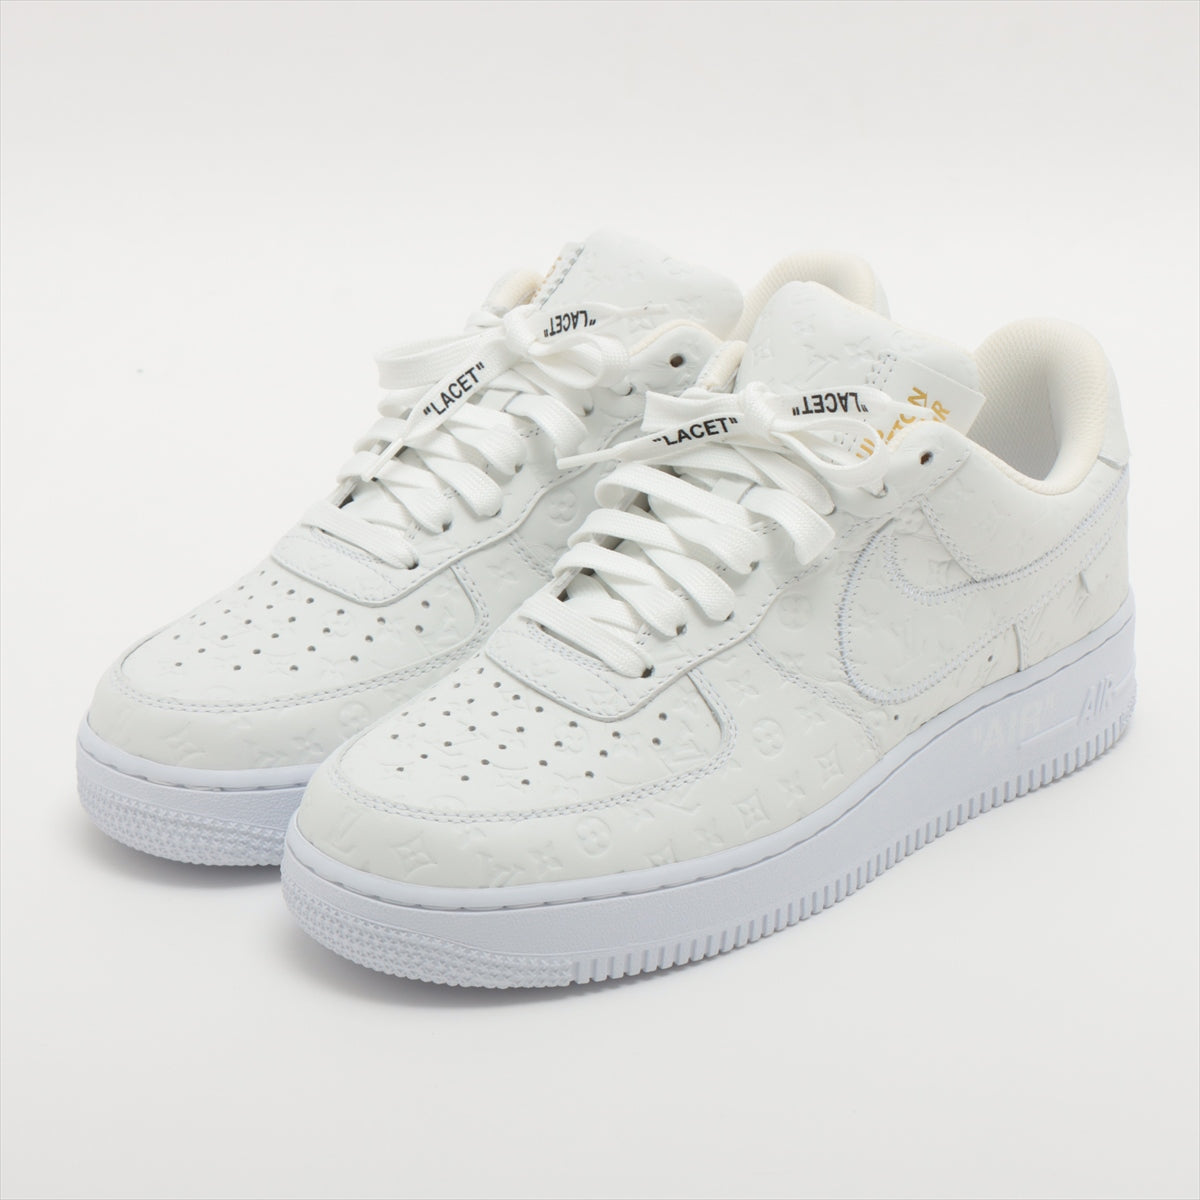 Vuitton x Nike 22SS Leather Sneakers 7 1/2 Men's White LD1221 AIR FORCE 1 LOW Monogram There is a box